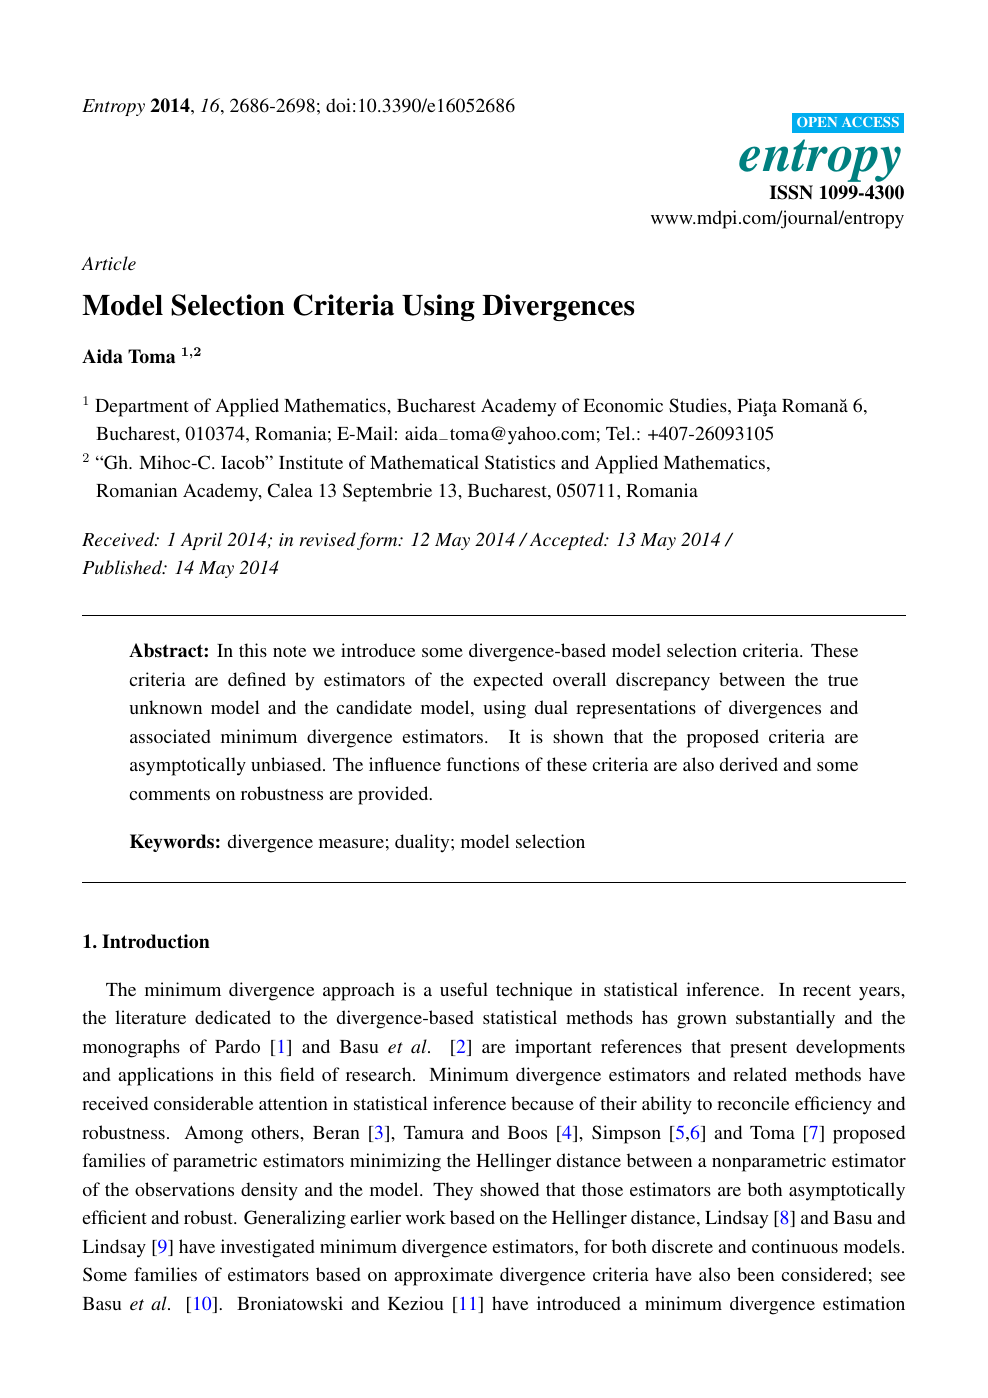 Model Selection Criteria Using Divergences Topic Of Research Paper In Mathematics Download Scholarly Article Pdf And Read For Free On Cyberleninka Open Science Hub